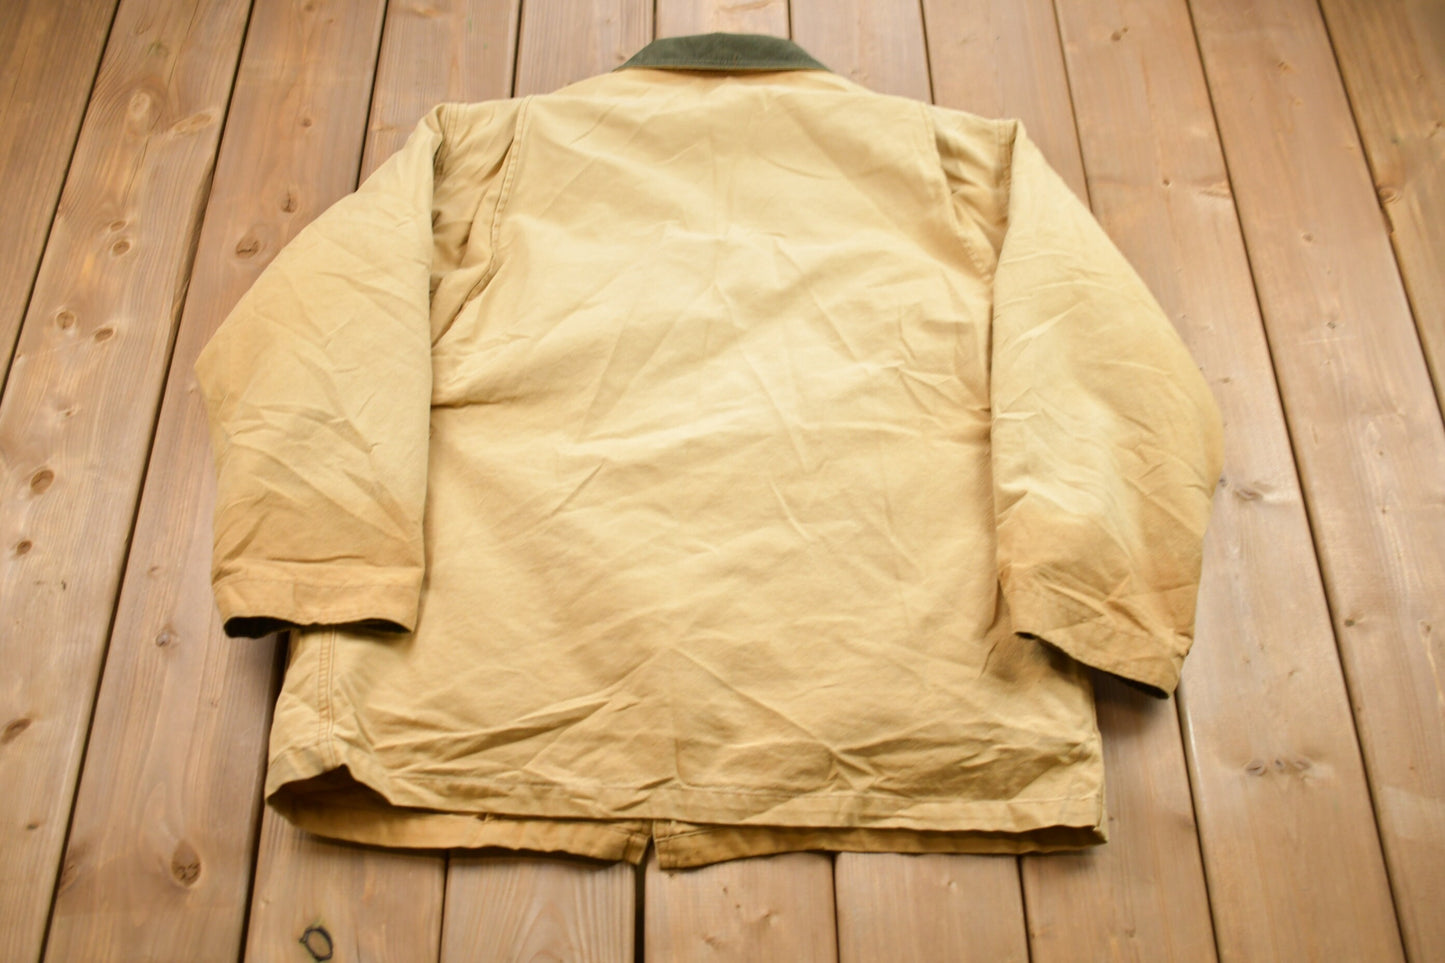 Vintage 1970s LL Bean Chore Jacket / Workwear / Streetwear / Made In USA / 90s / Blanket Lined Jacket / D Pocket / Union Made